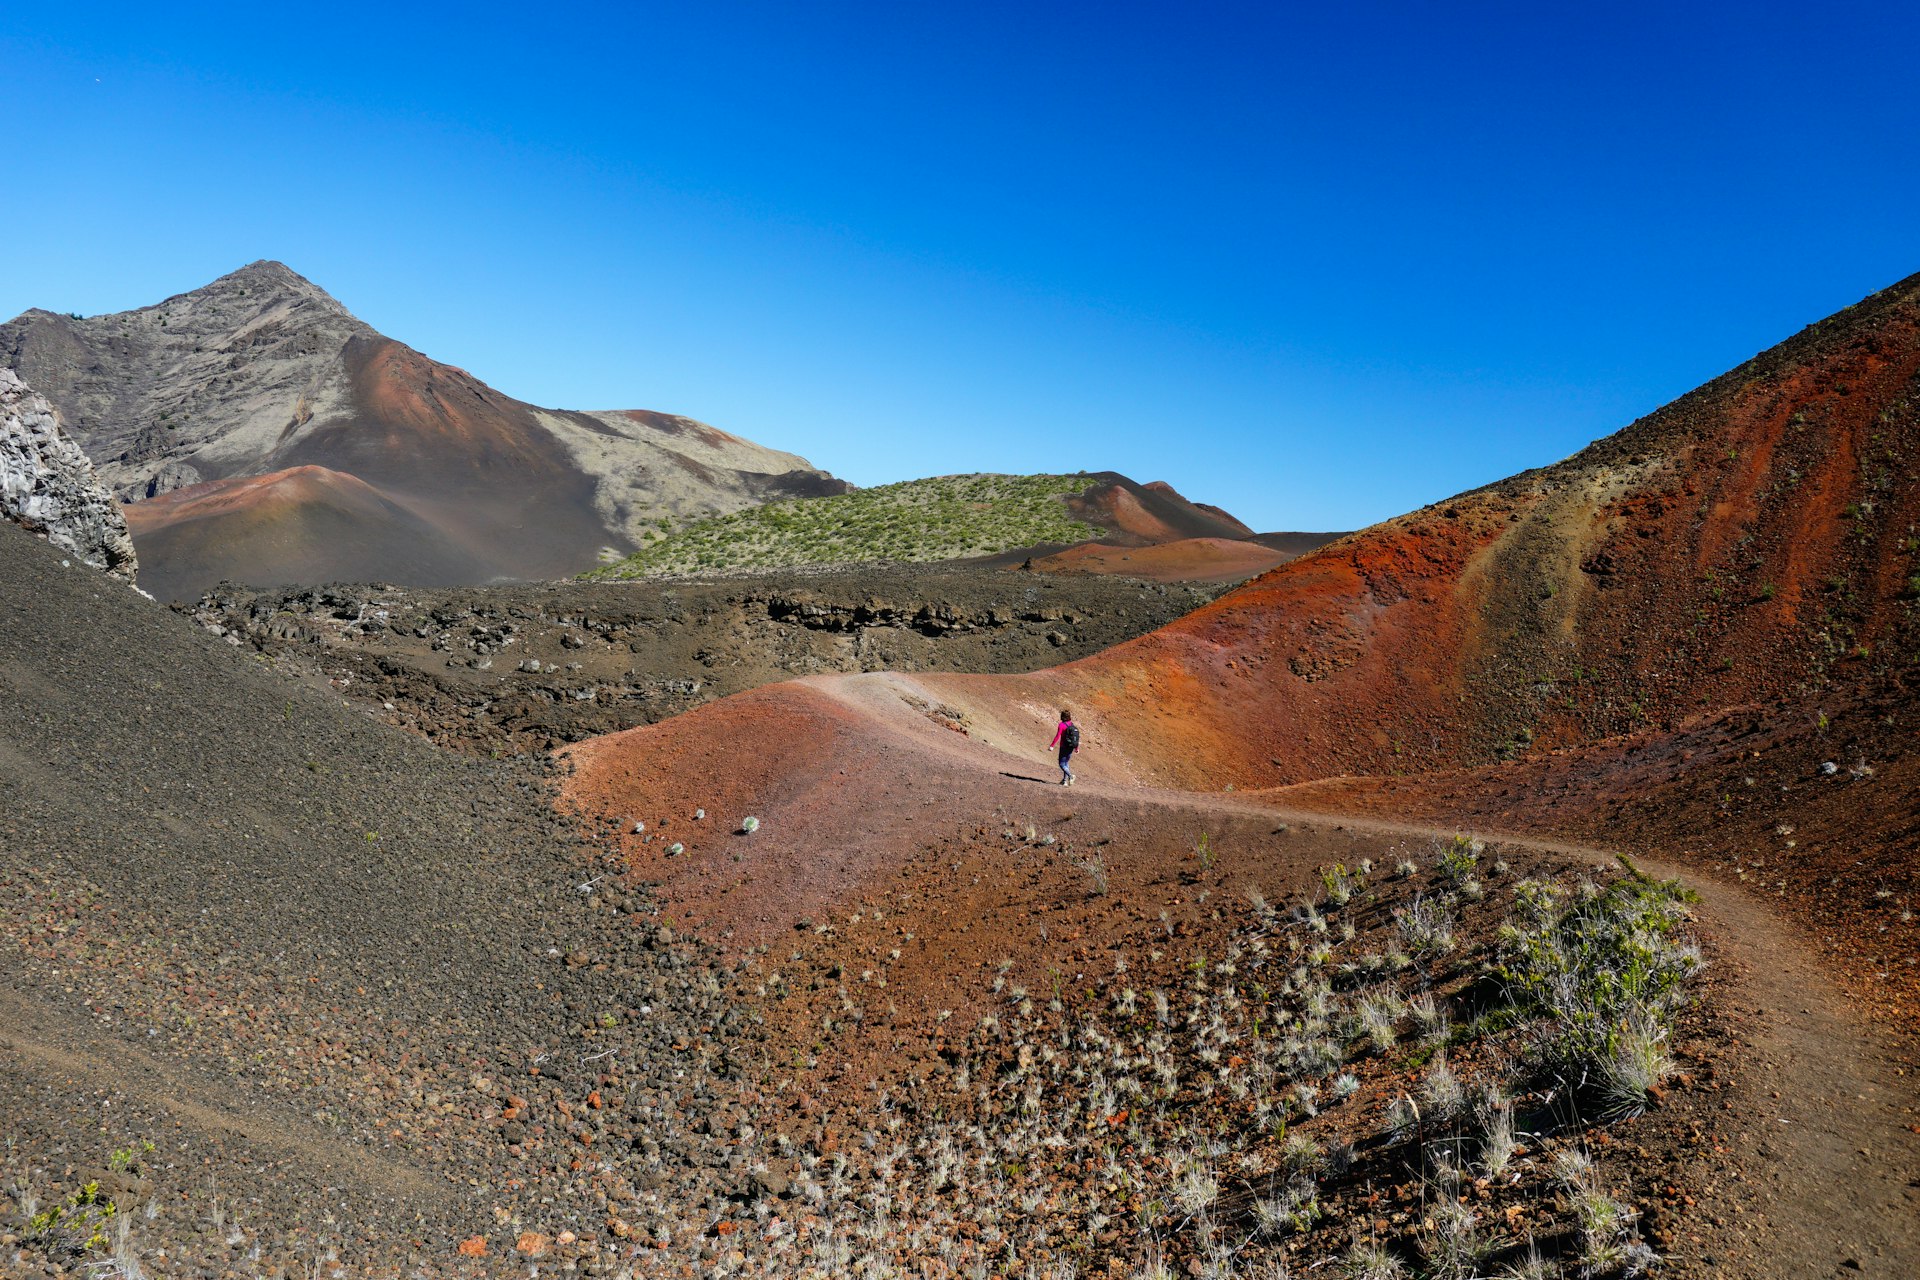 A person seen in the distance walking through the colorful landscape of Haleakala National Park, Hawaii